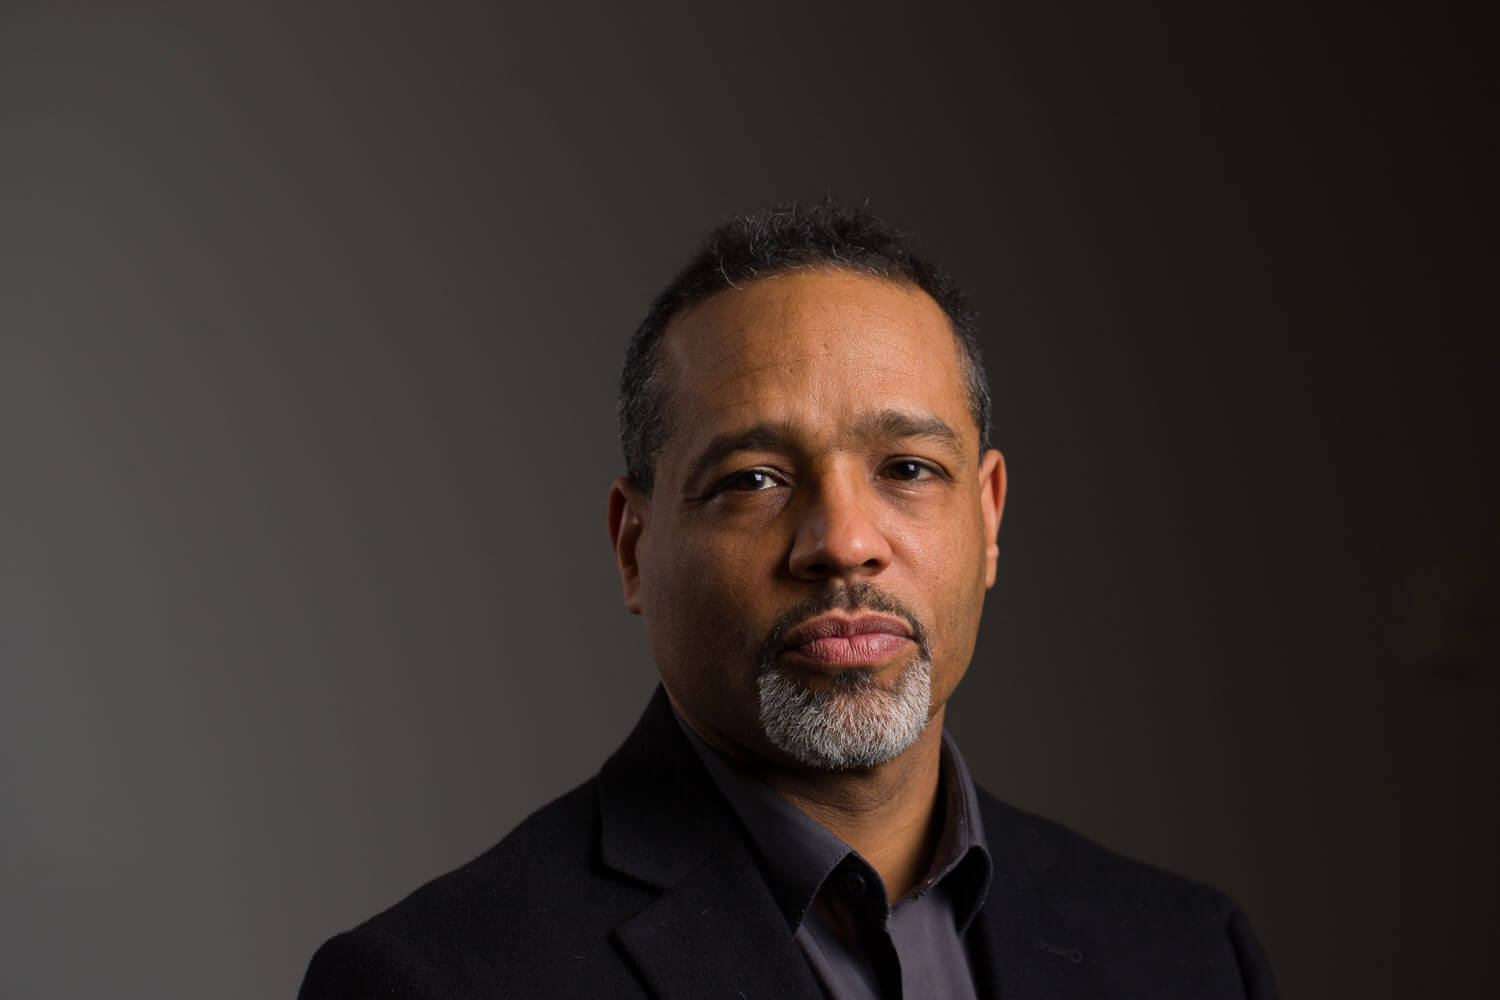 A headshot of a new dean, B. Stephen Carpenter II, a middle aged African-American man